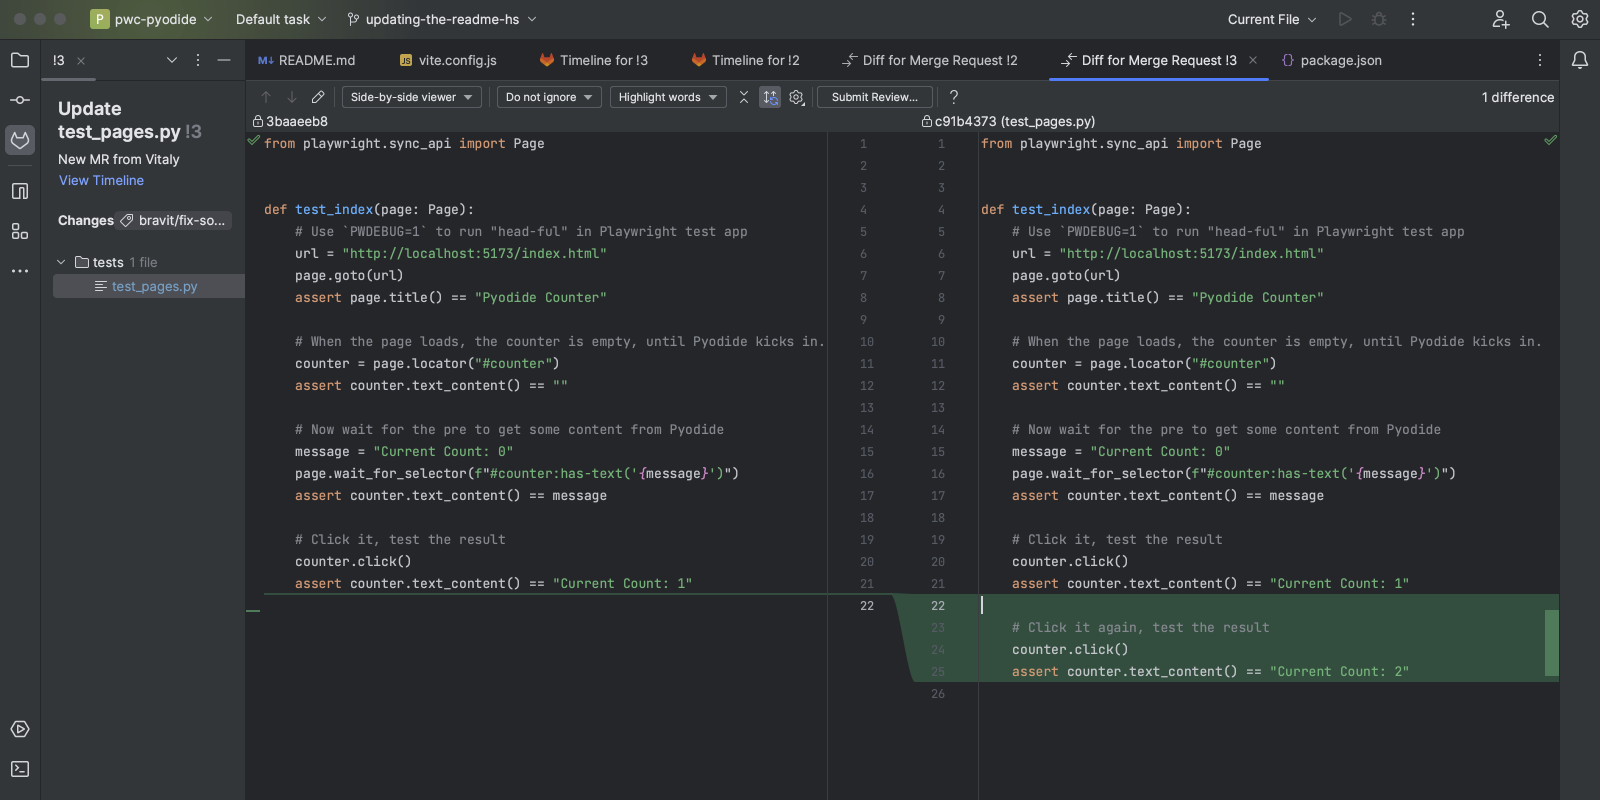 Showing the GitLab integration in WebStorm during a merge request